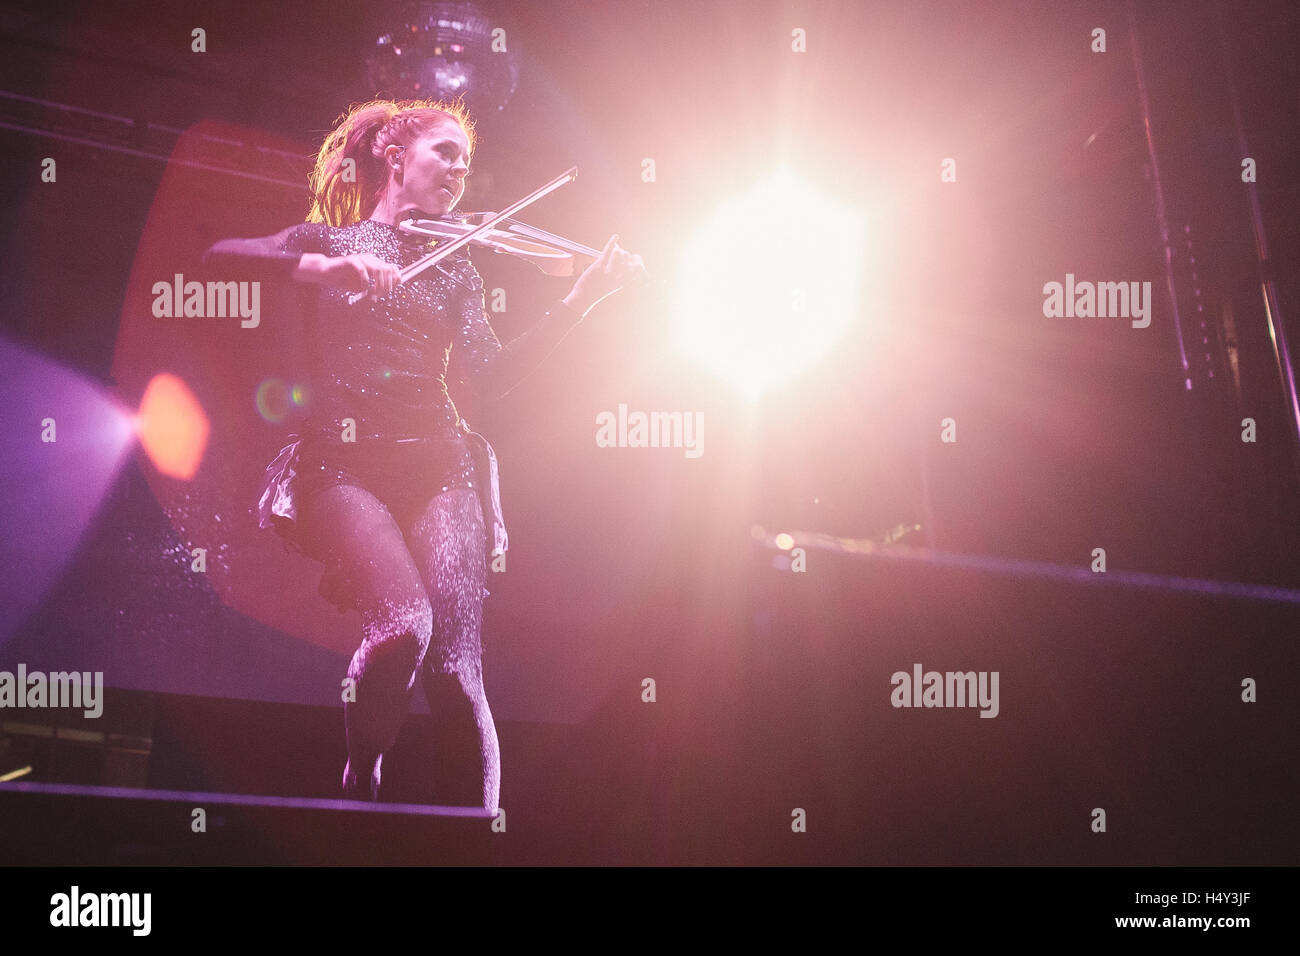 Lindsey Stirling performs at Bumbershoot Festival on September 5, 2015 in Seattle, Washington. Stock Photo